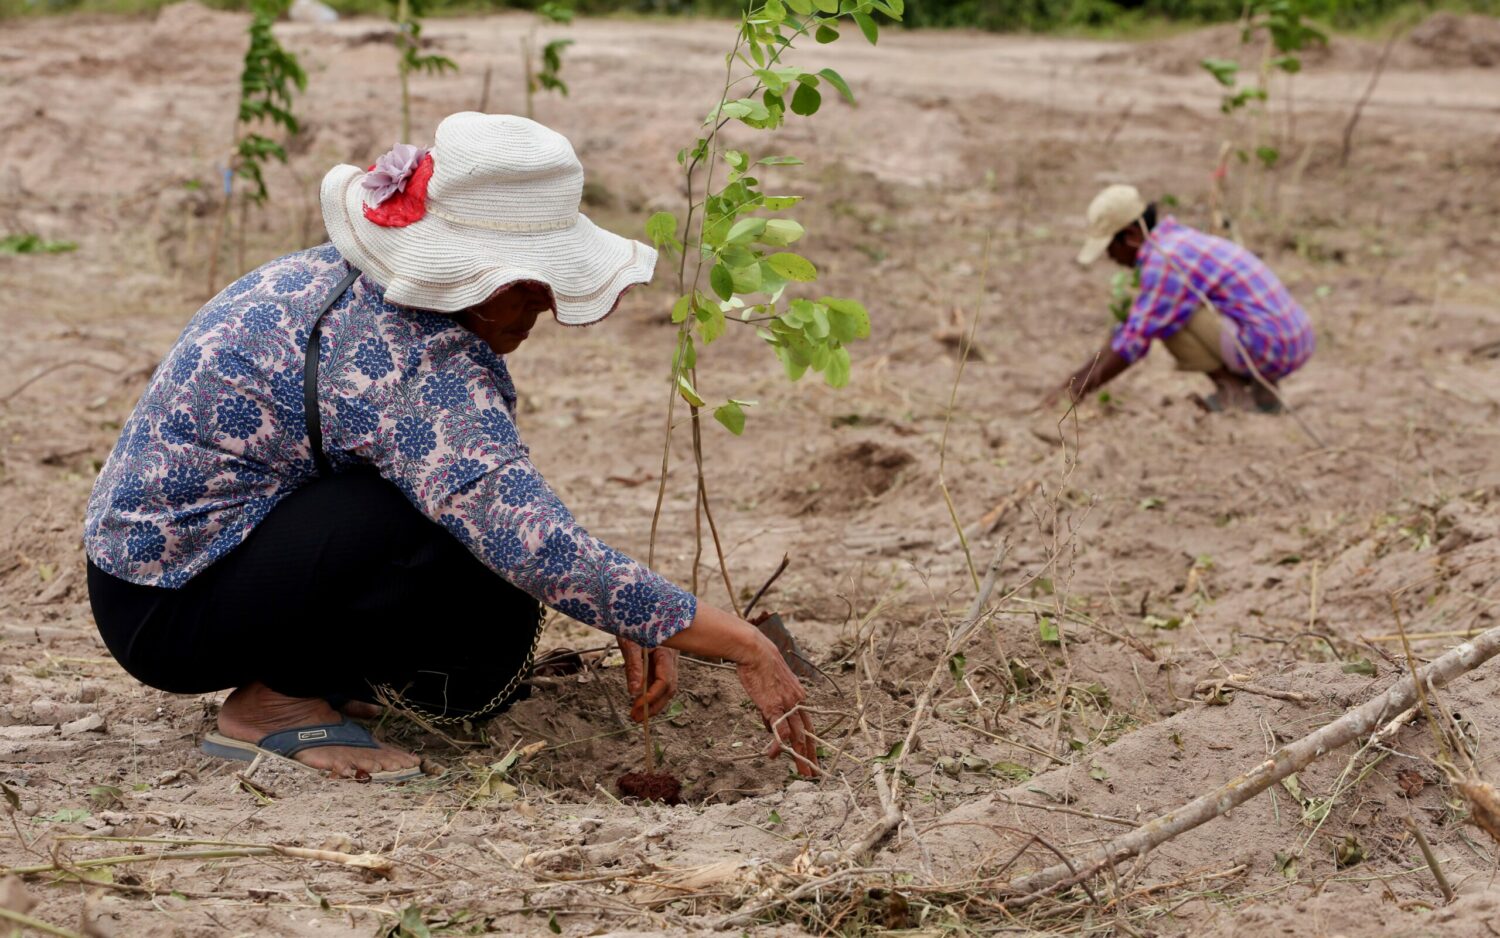 Workers plant saplings at Phnom Tamao forest on August 8, 2022. (Hean Rangsey/VOD)